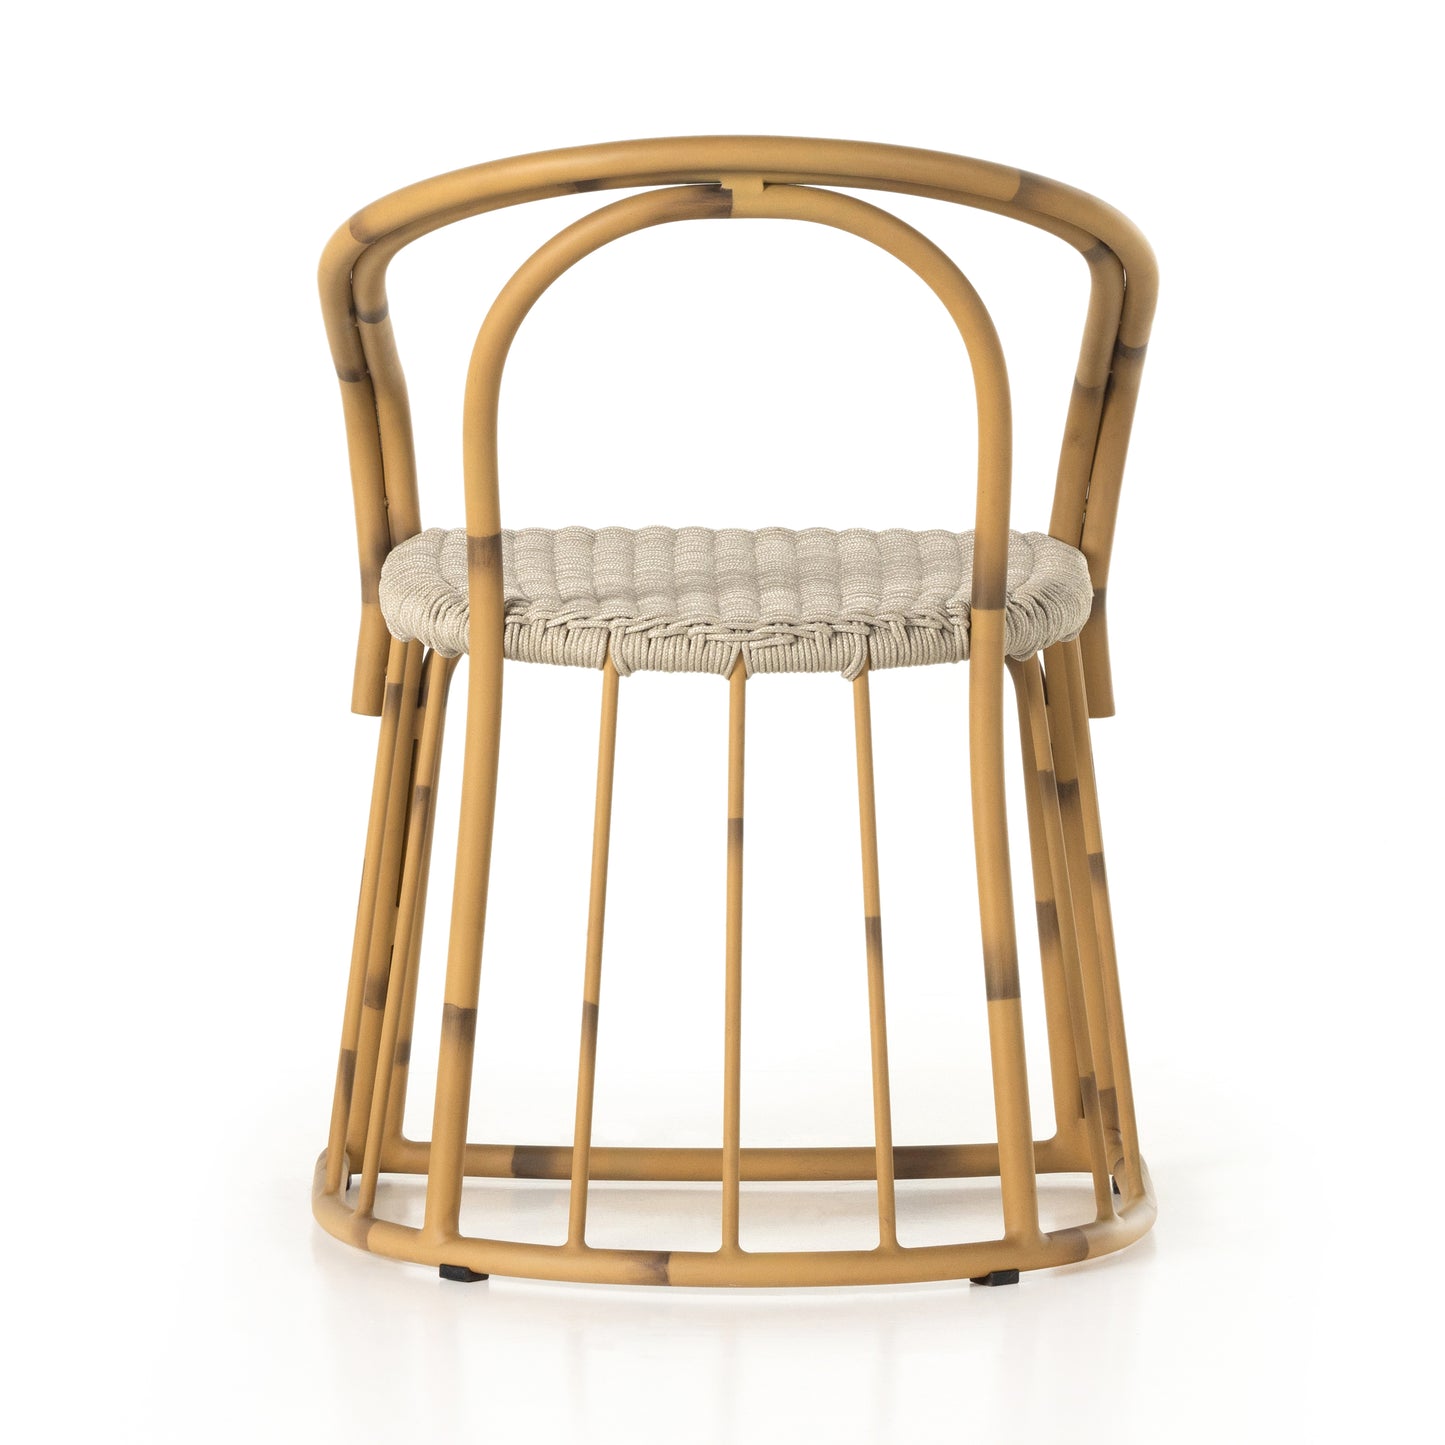 Vago Outdoor Dining Chair - Painted Ratten Outdoor Seating Four Hands     Four Hands, Mid Century Modern Furniture, Old Bones Furniture Company, Old Bones Co, Modern Mid Century, Designer Furniture, https://www.oldbonesco.com/